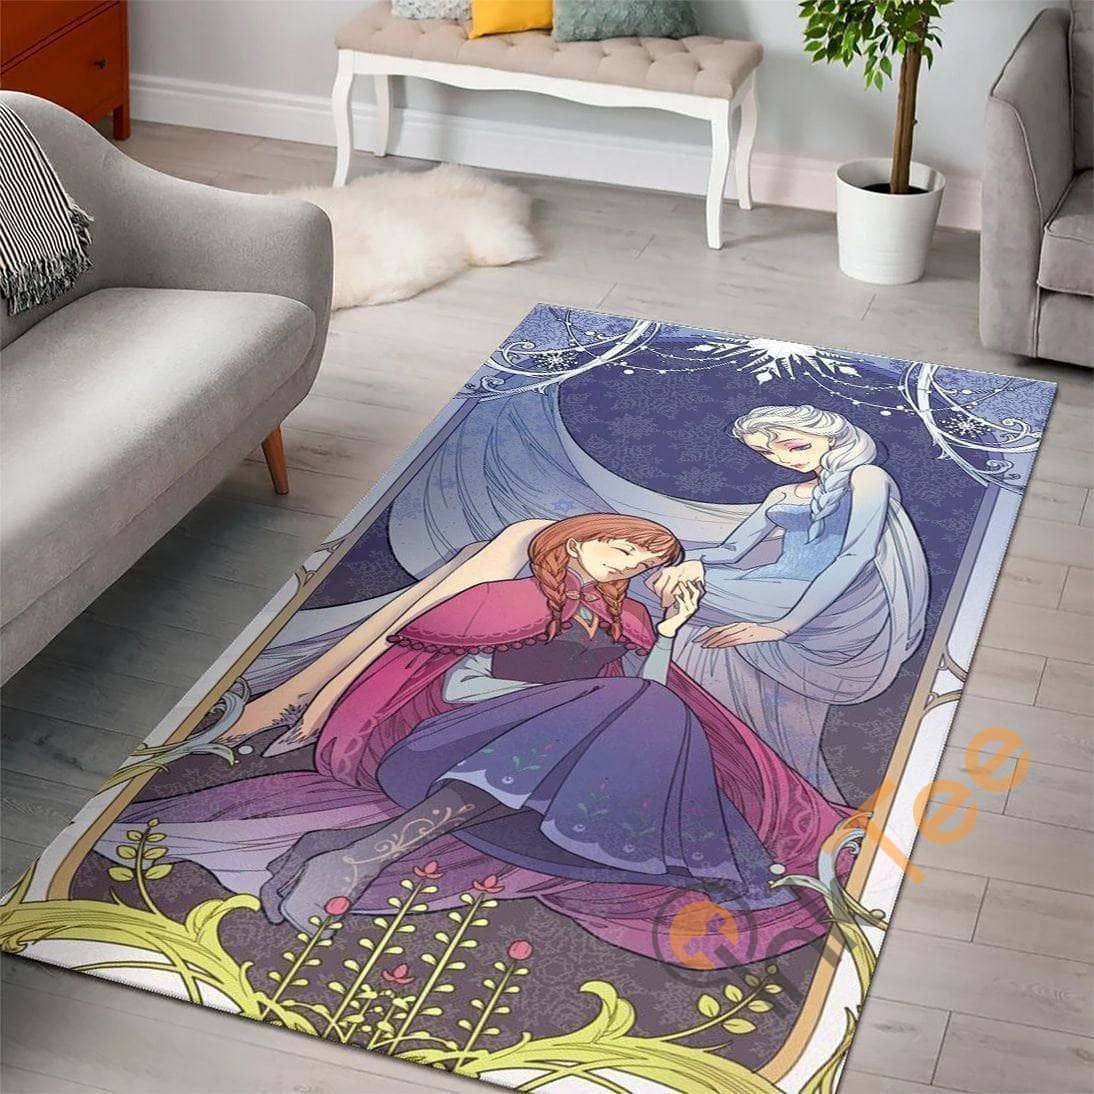 Frozen Disney Movies I Love You To For Living Room Bedroom Lover Rug